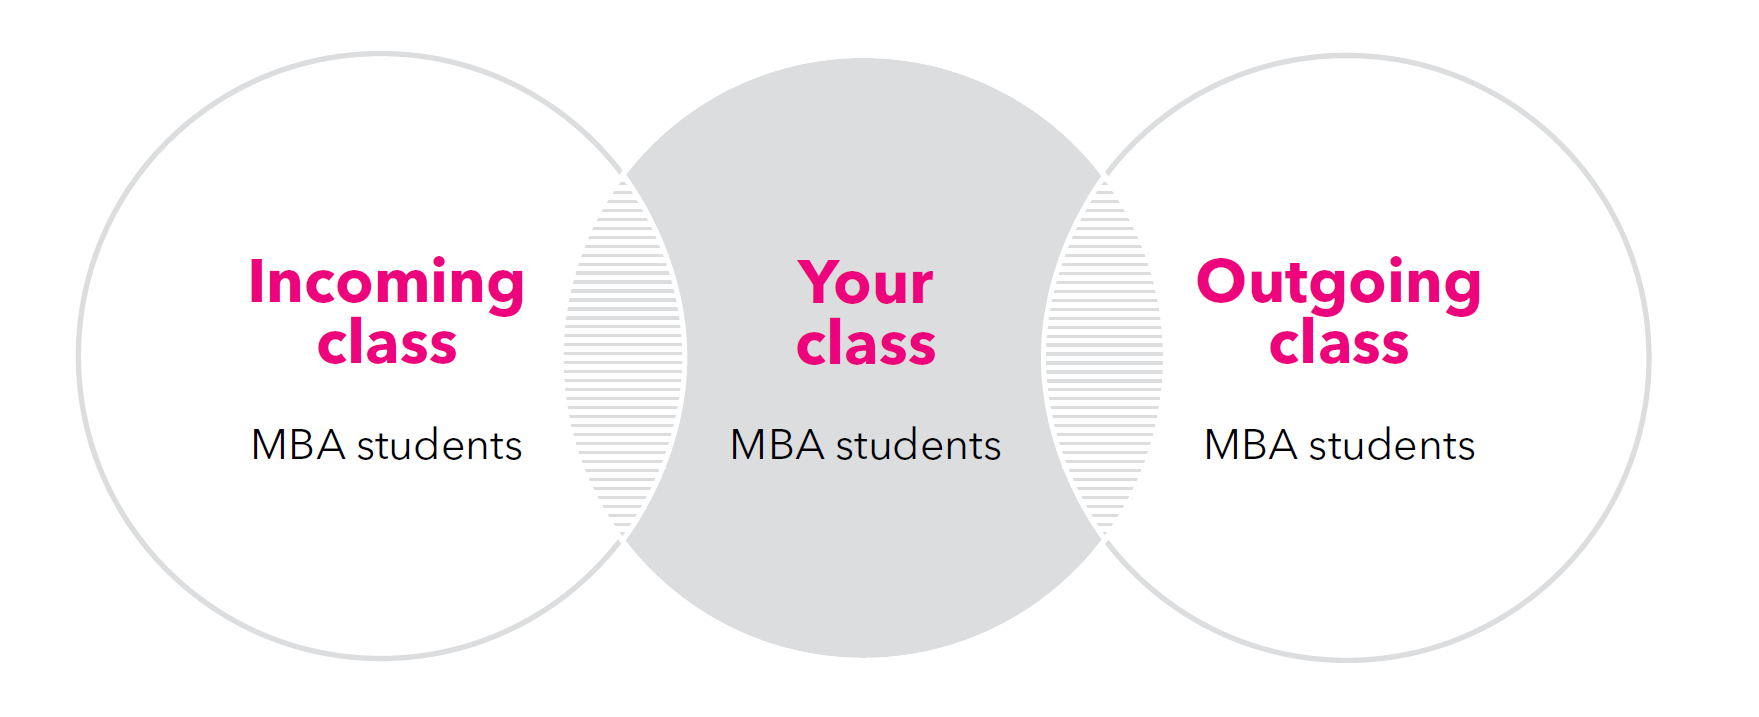 Your network includes students from the outgoing MBA class as well as the incoming MBA class.